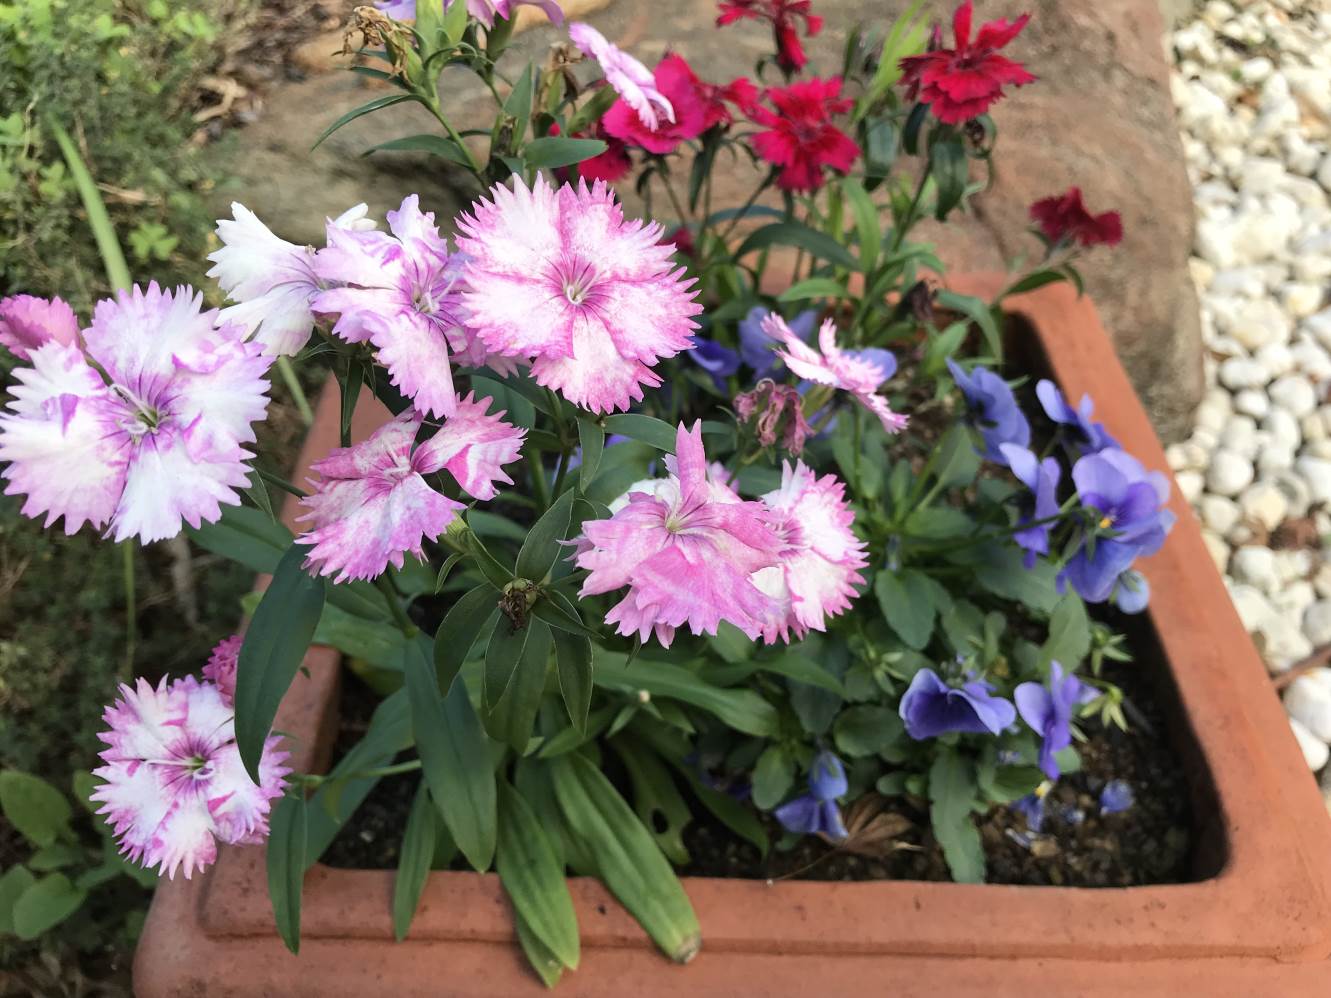 Dianthus flowering in a pot